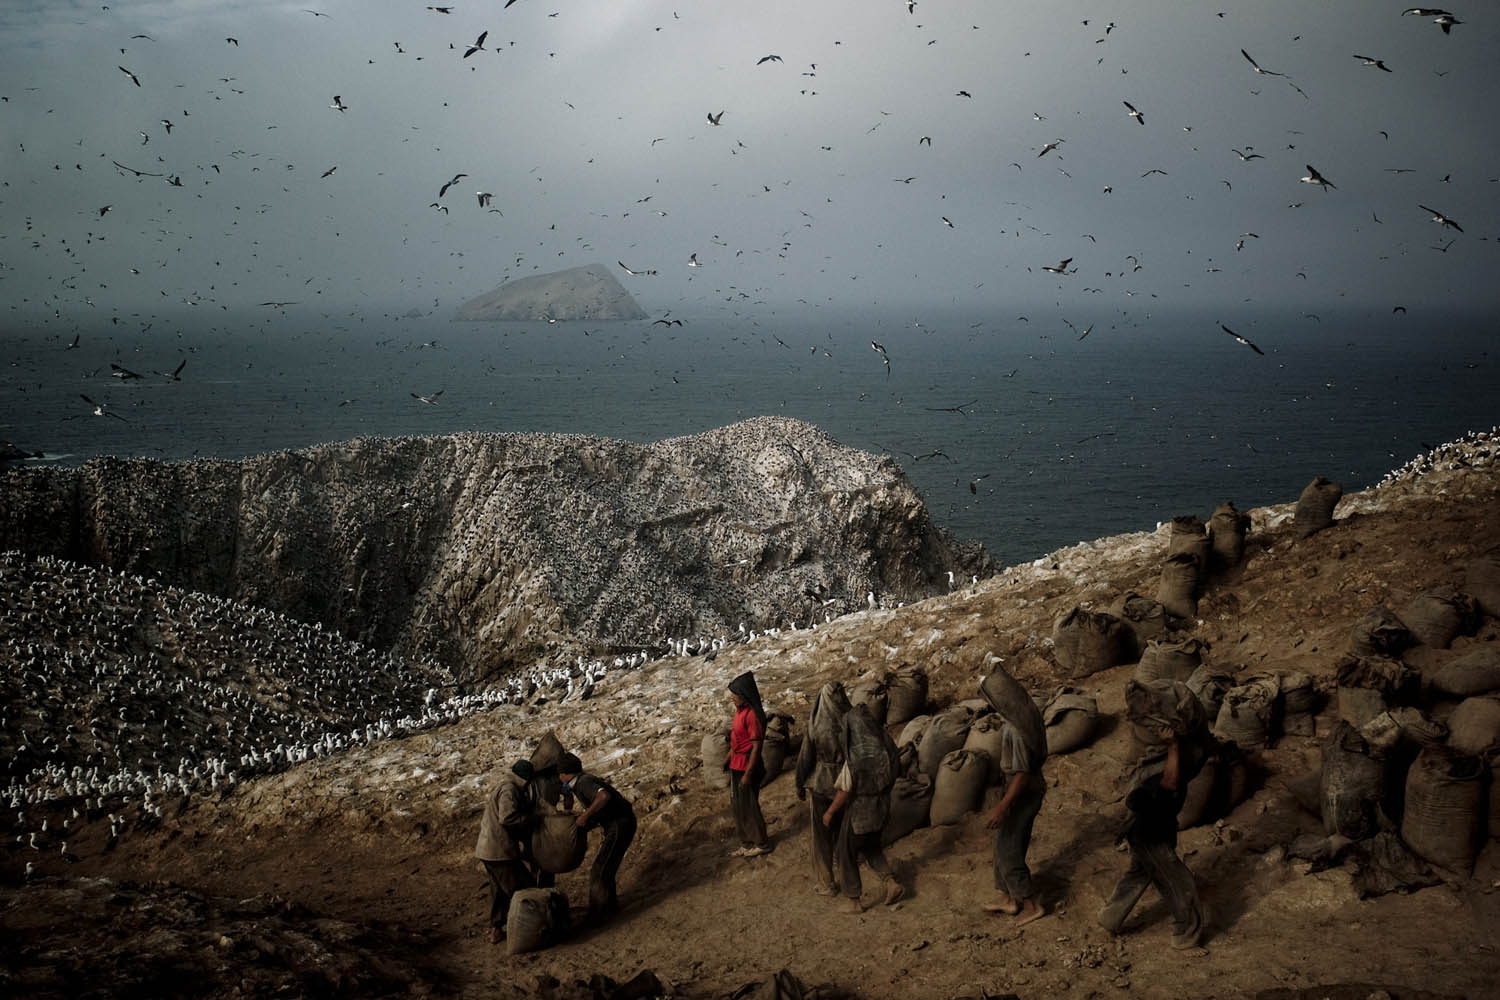 Porters wait for a sack of guano to carry, Guañape Norte Island in the coast off Peru, May 2008. Photo/Tomas Munita